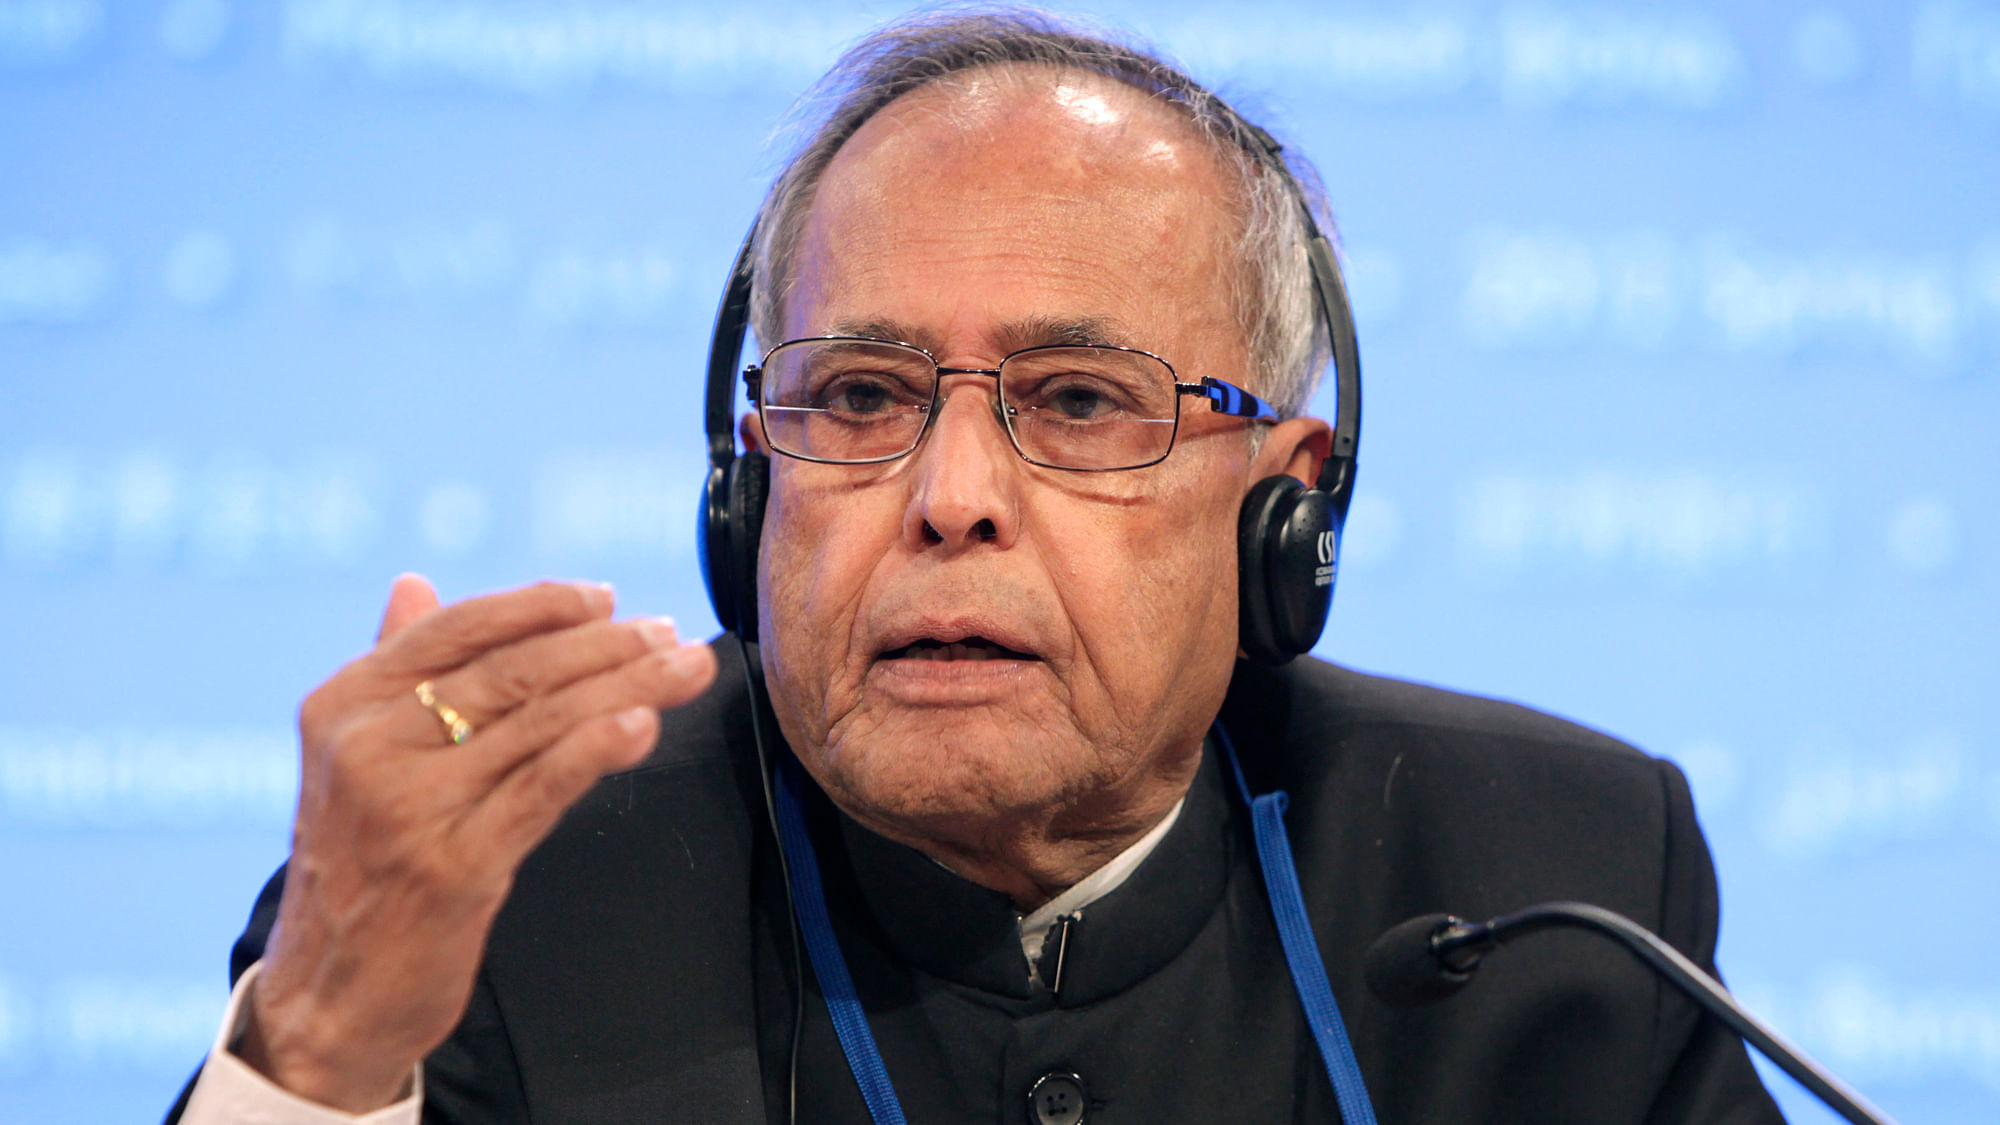 President Pranab Mukherjee said there must be space for legitimate criticism and dissent. (Photo: Reuters)